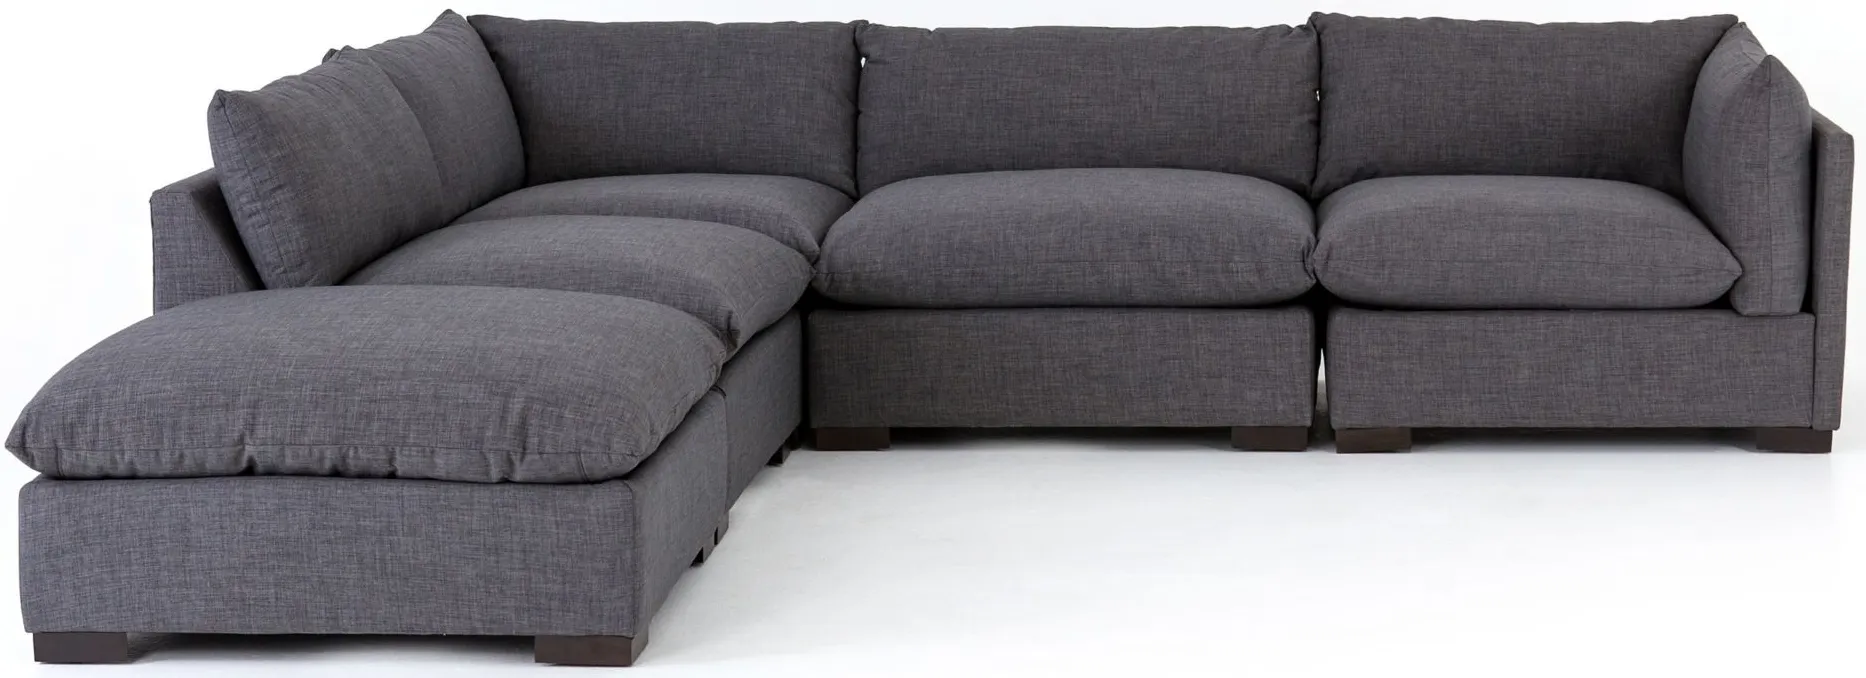 Westwood 5-pc. Modular Sectional Sofa in Bennett Charcoal by Four Hands